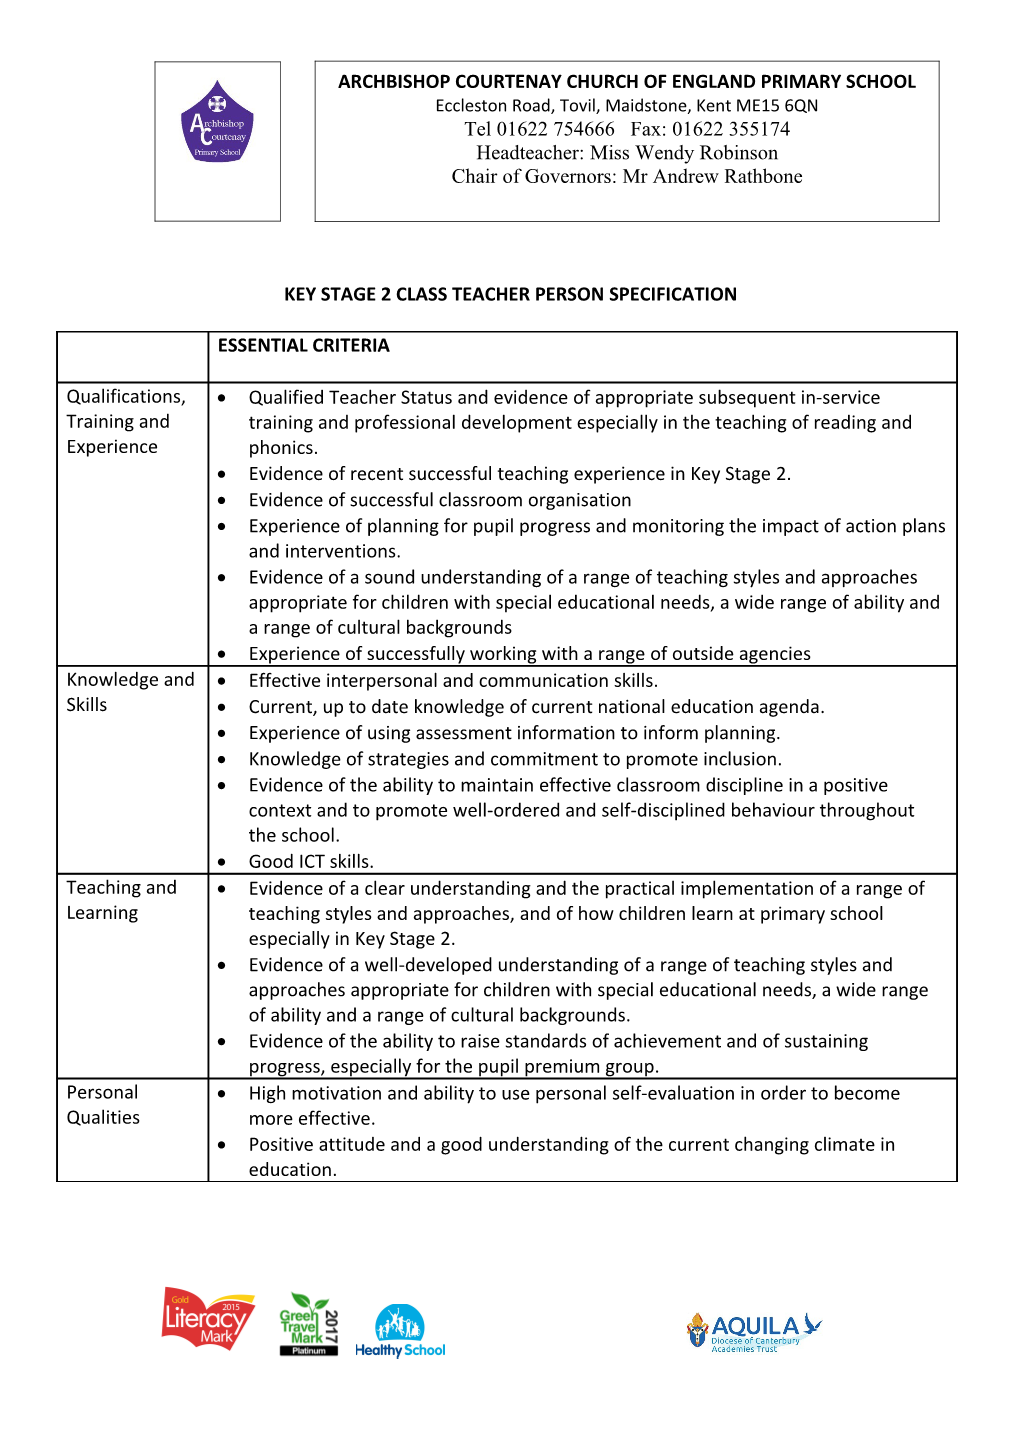 Key Stage 2 Class Teacher Person Specification